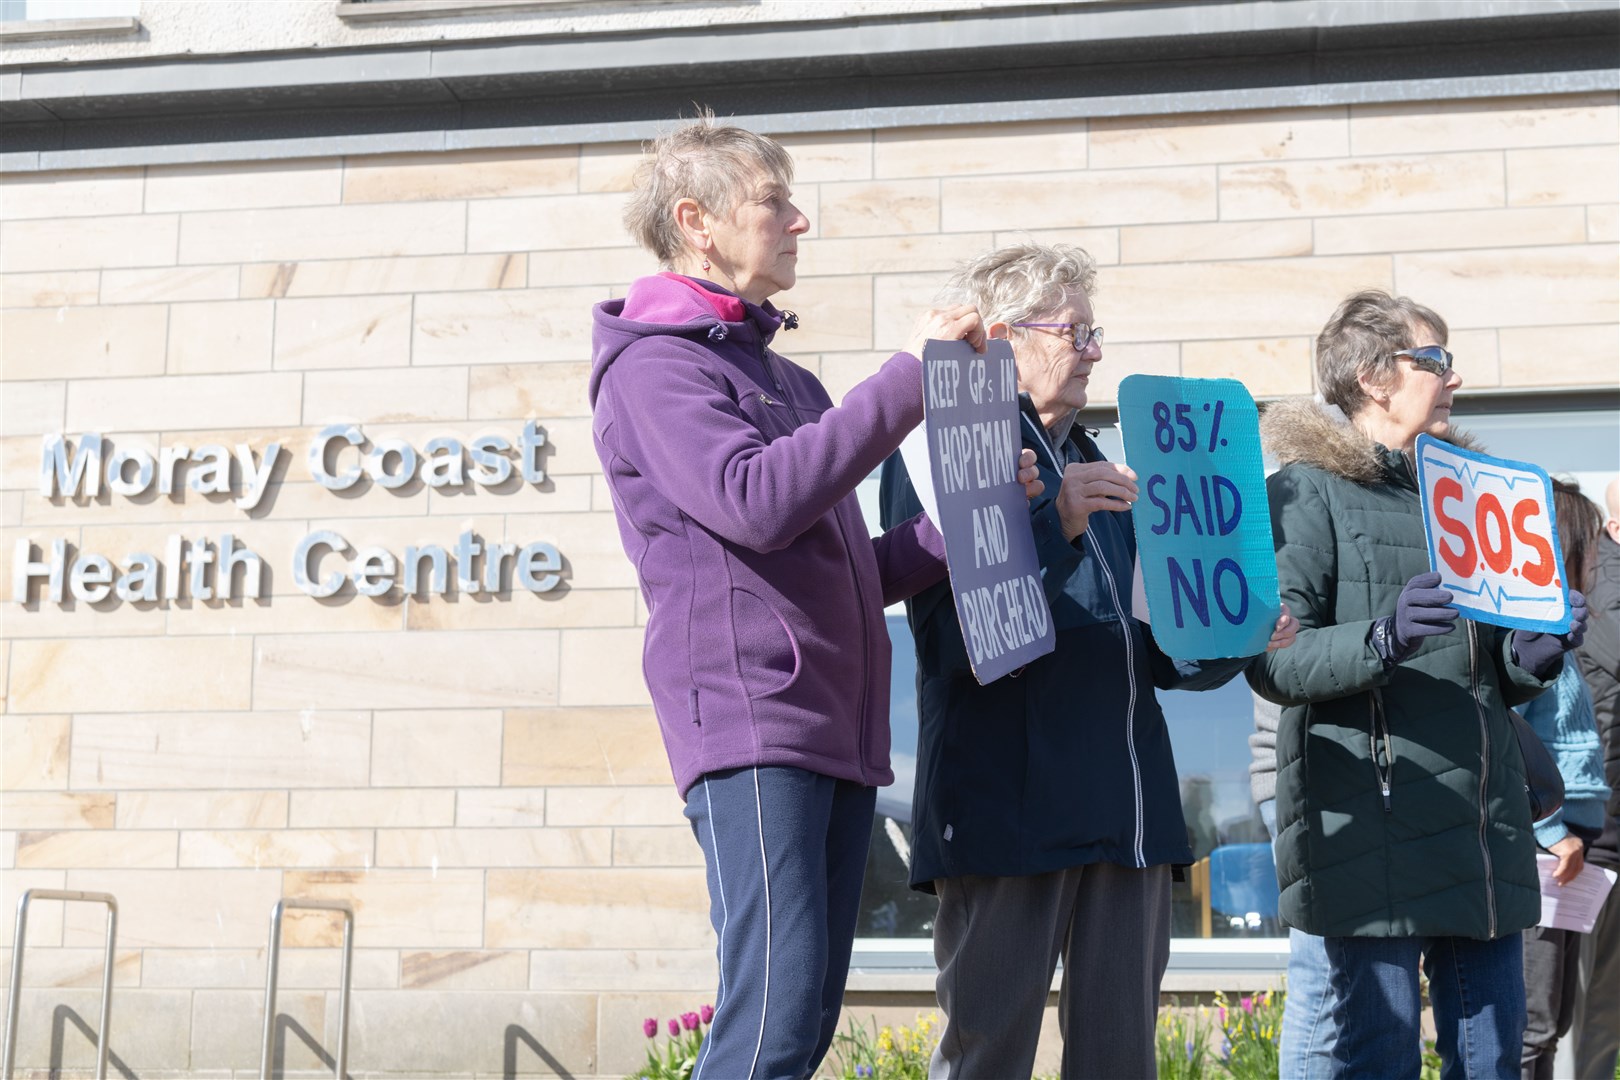 Protestors campaigned outside of Moray Coast Medical Centre in Lossiemouth. Picture: Beth Taylor